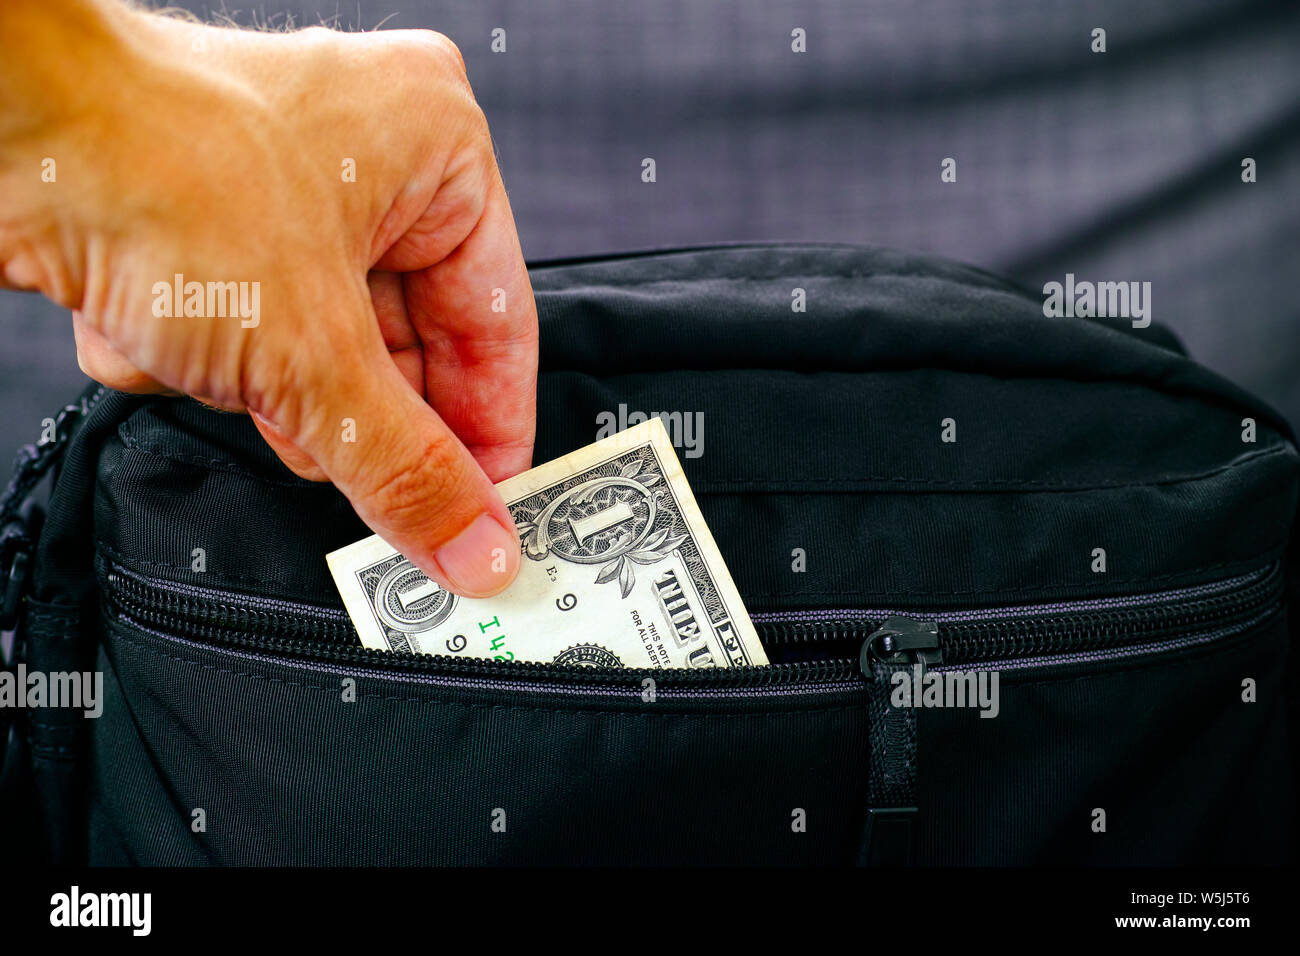 Man hand taking out money from black bag. Close up. Stock Photo